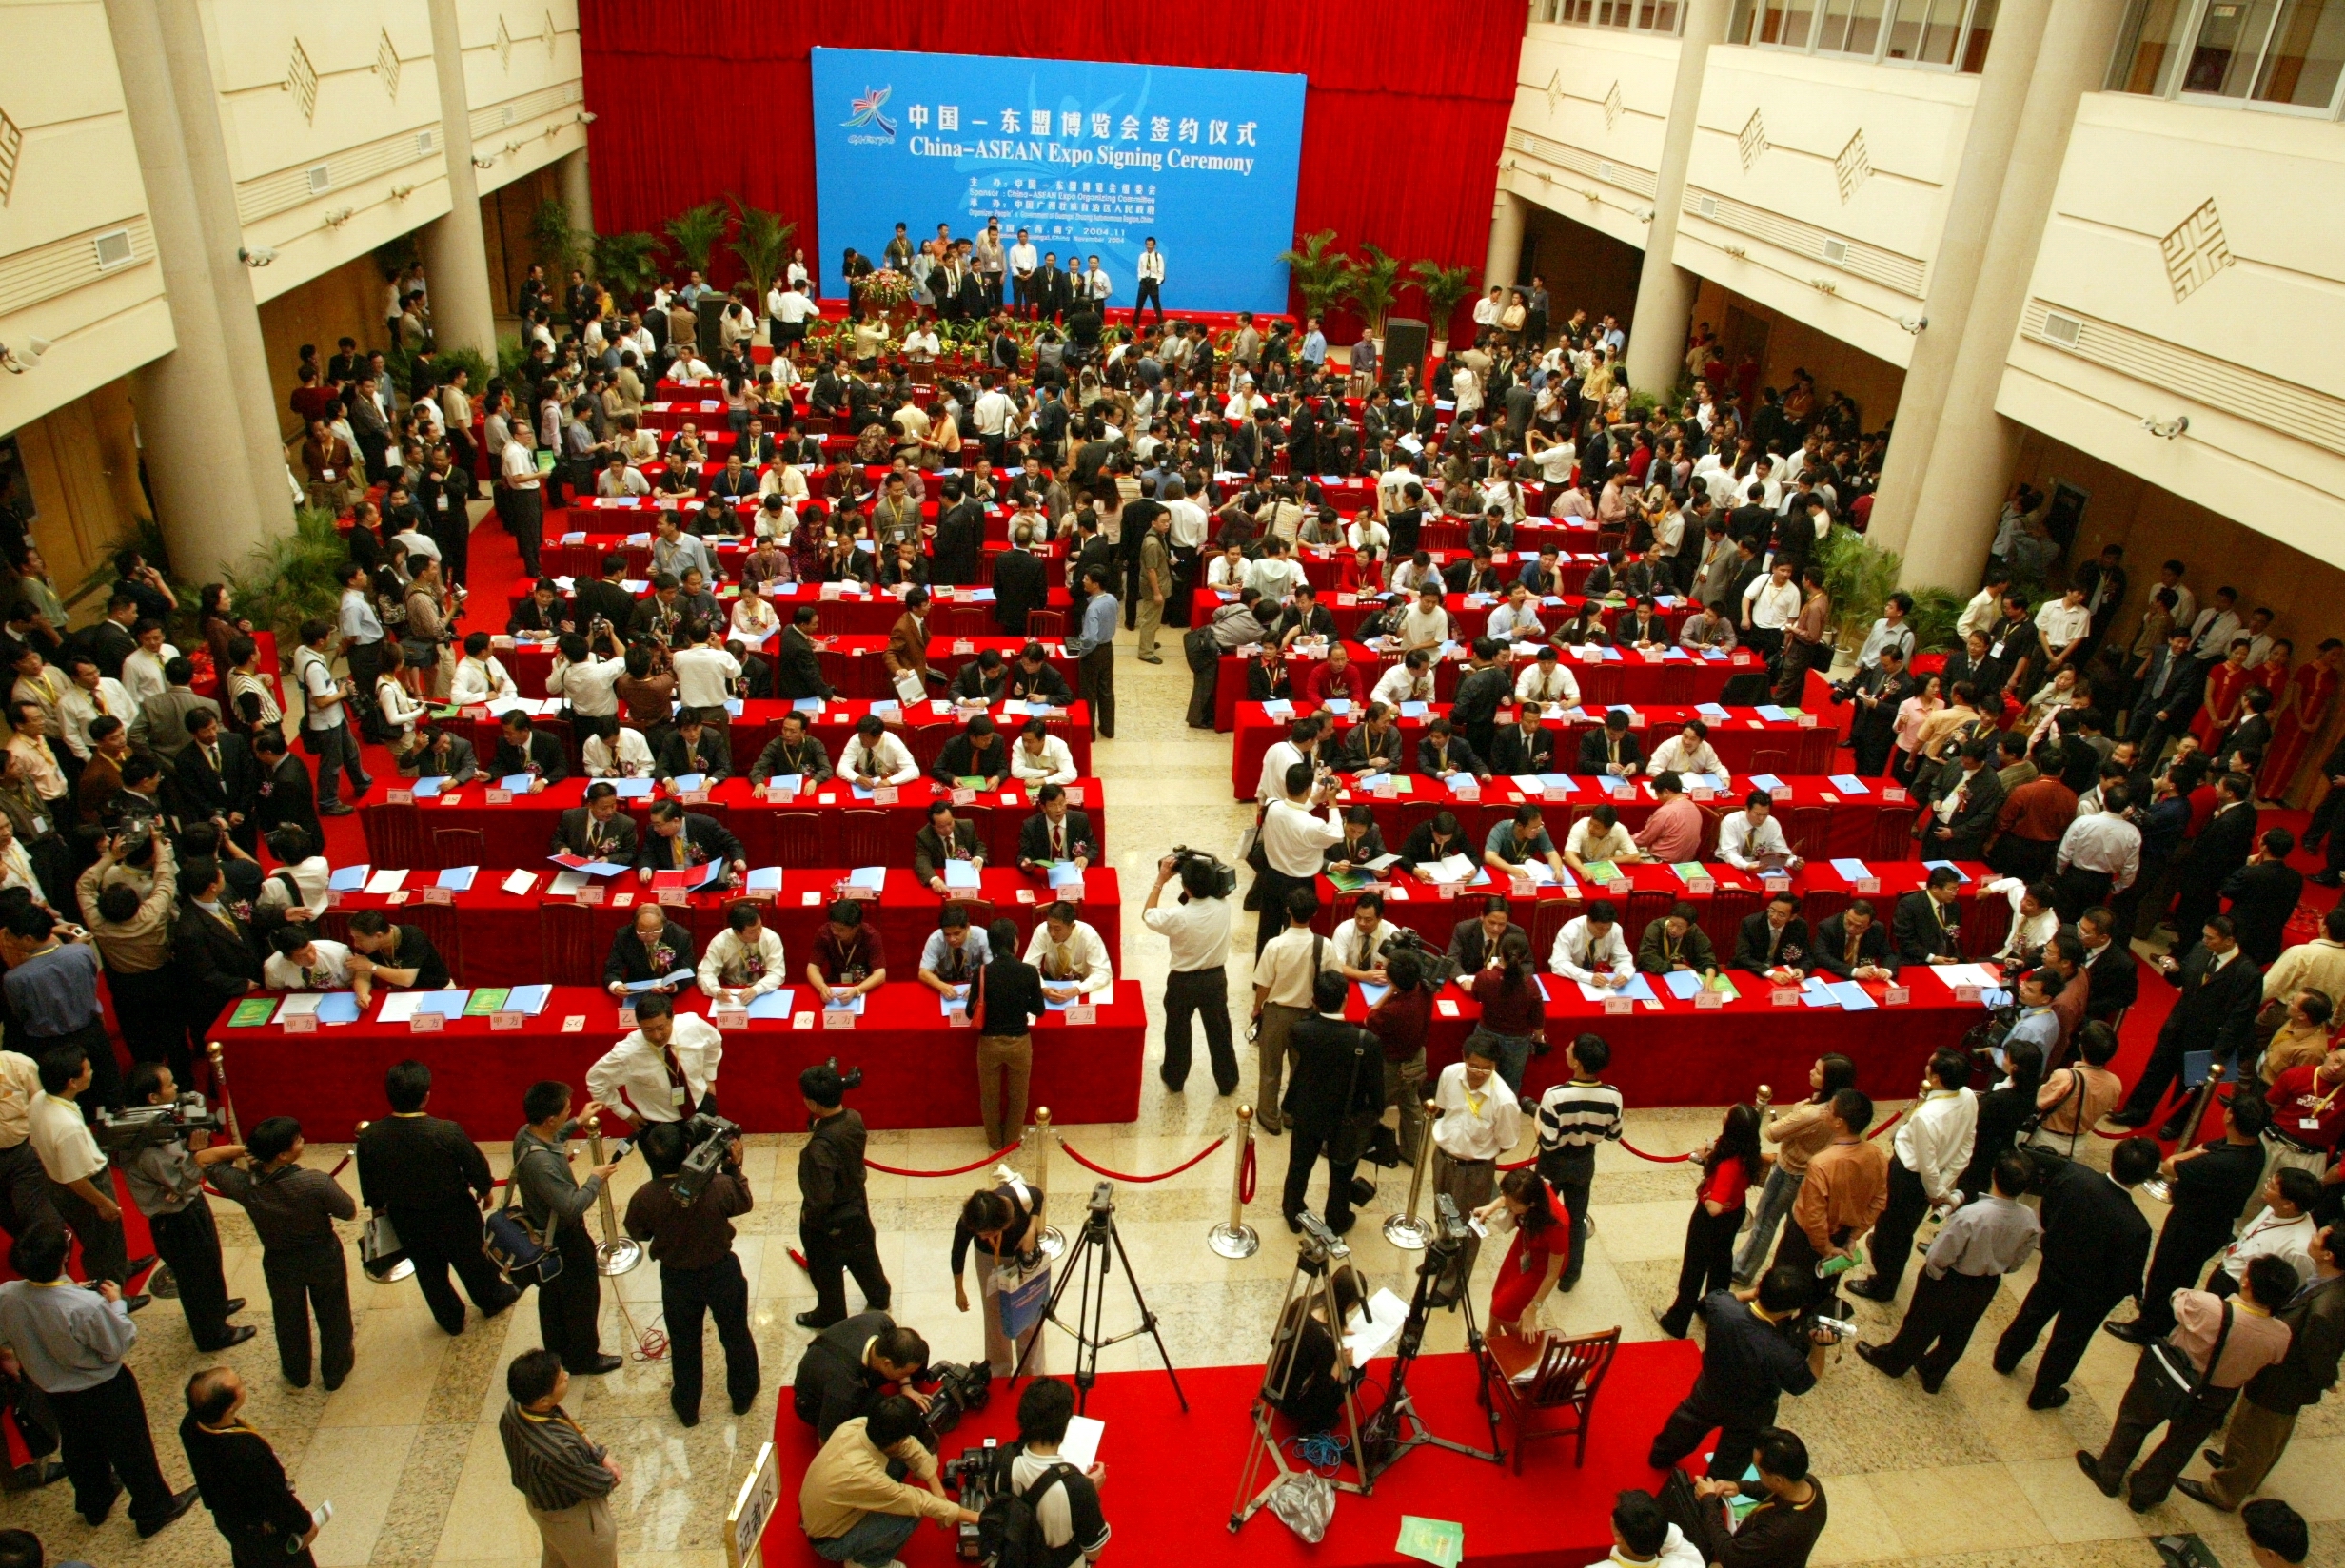 The first China-ASEAN Expo